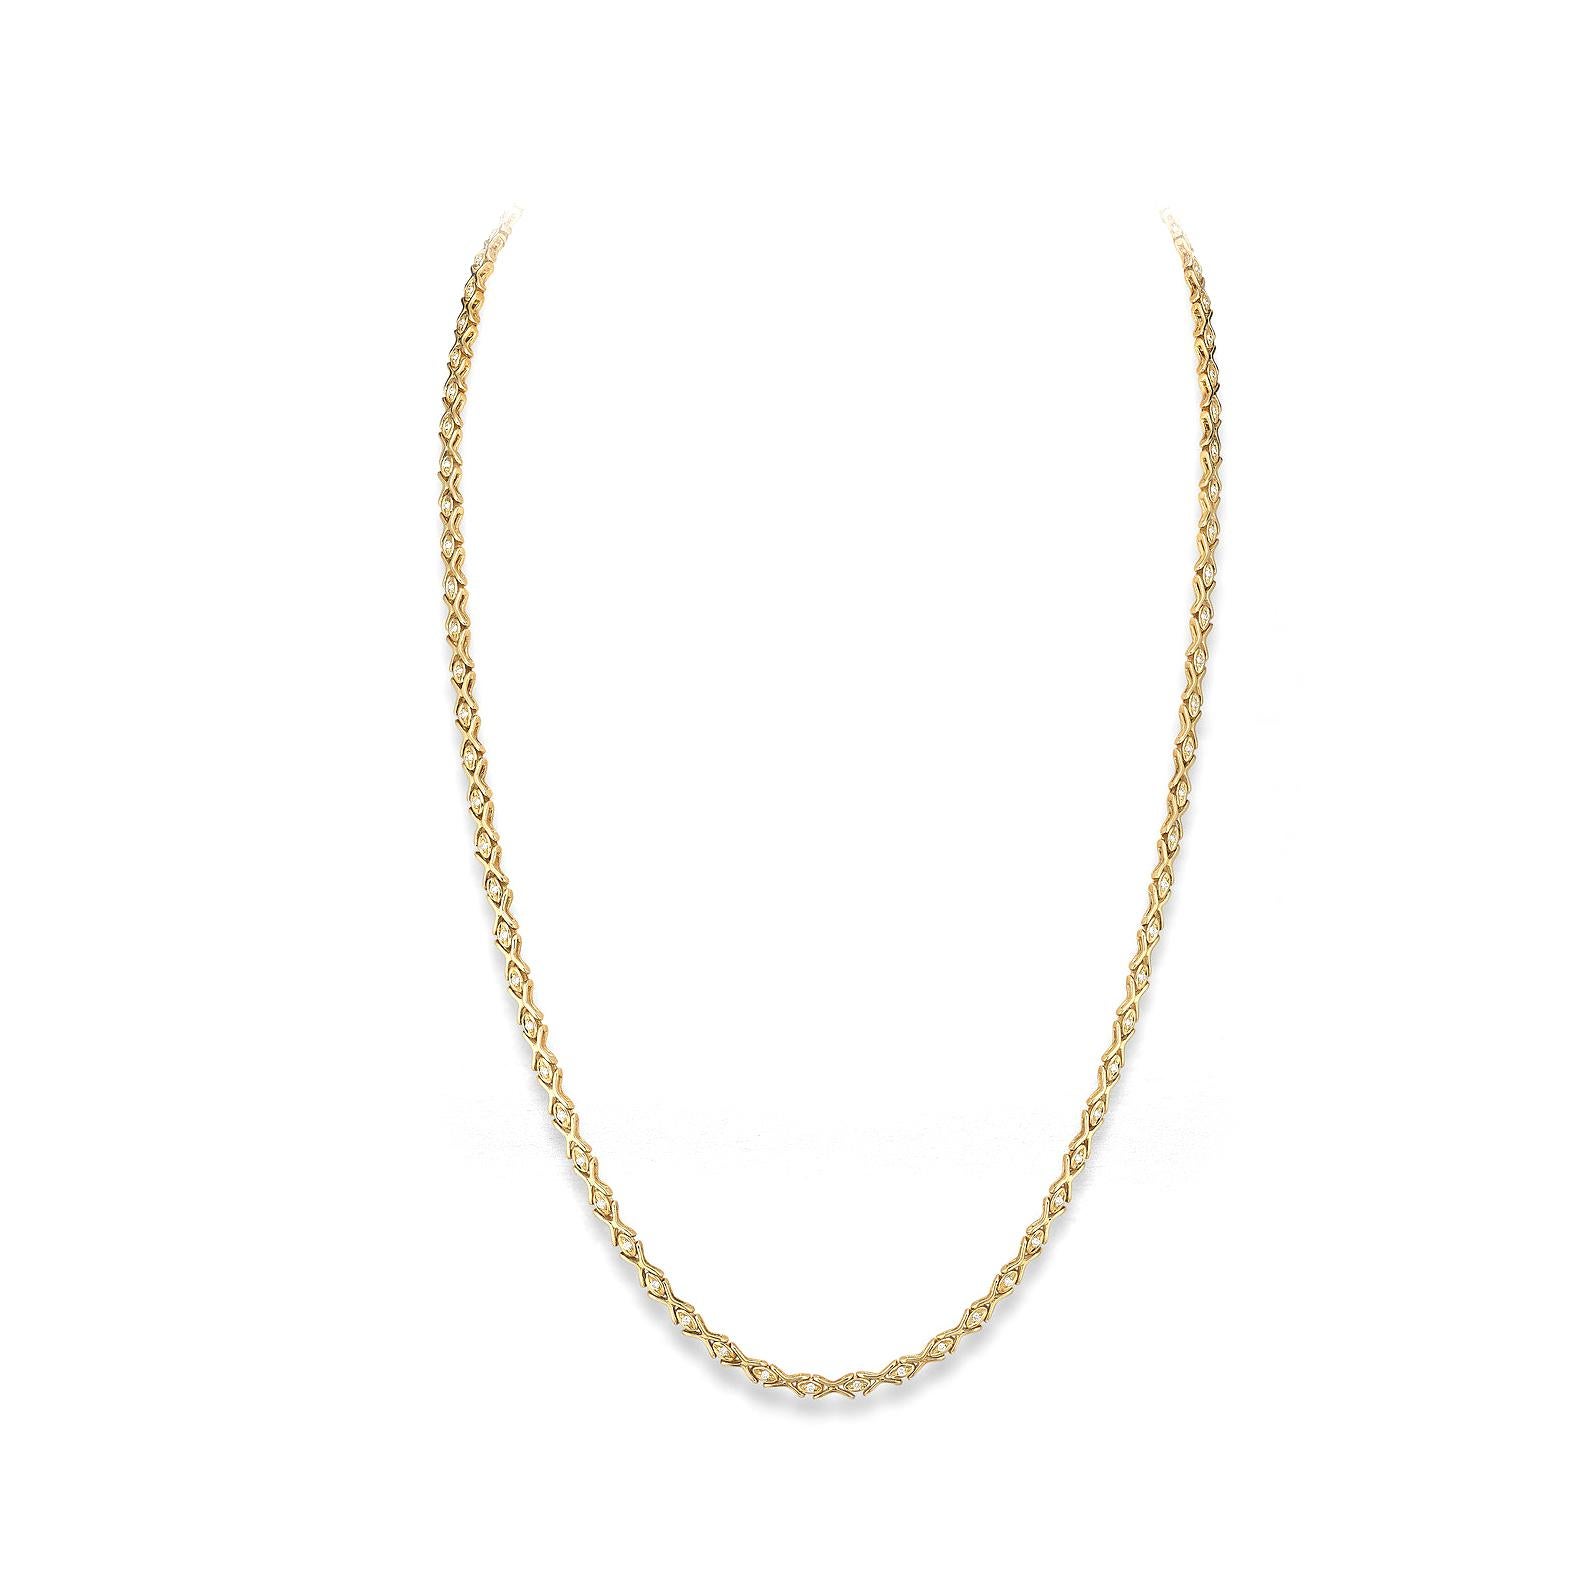 Necklace in 18kt yellow gold set with 81 diamonds 1.10 cts